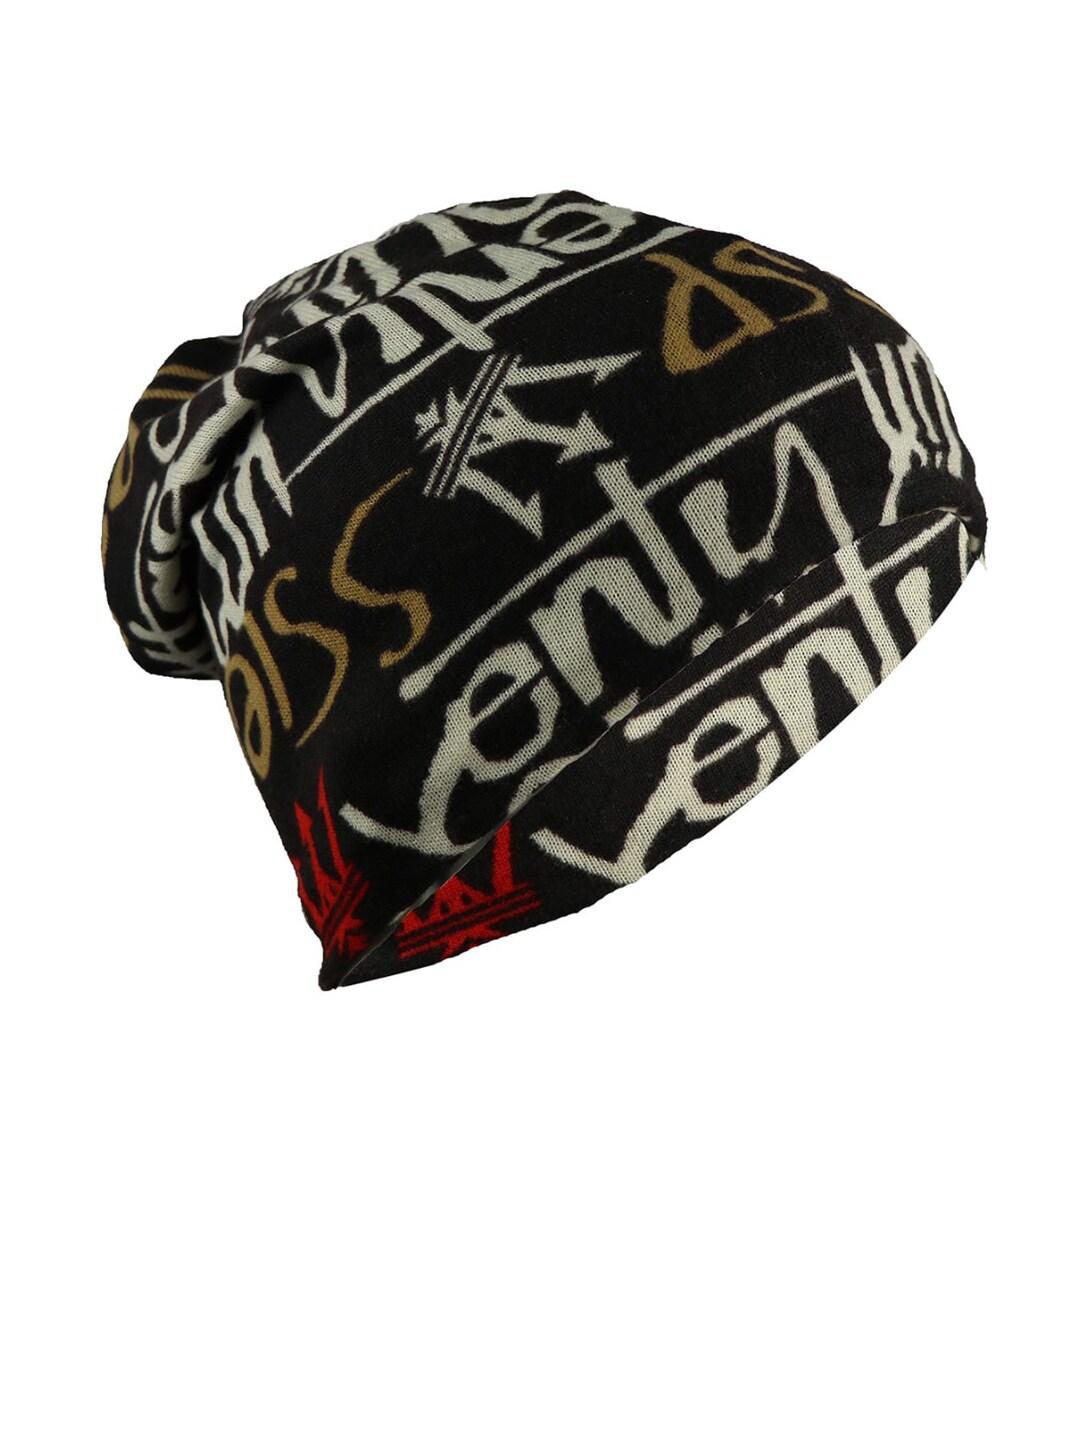 iSWEVEN Unisex Black & Red Printed Beanie Price in India